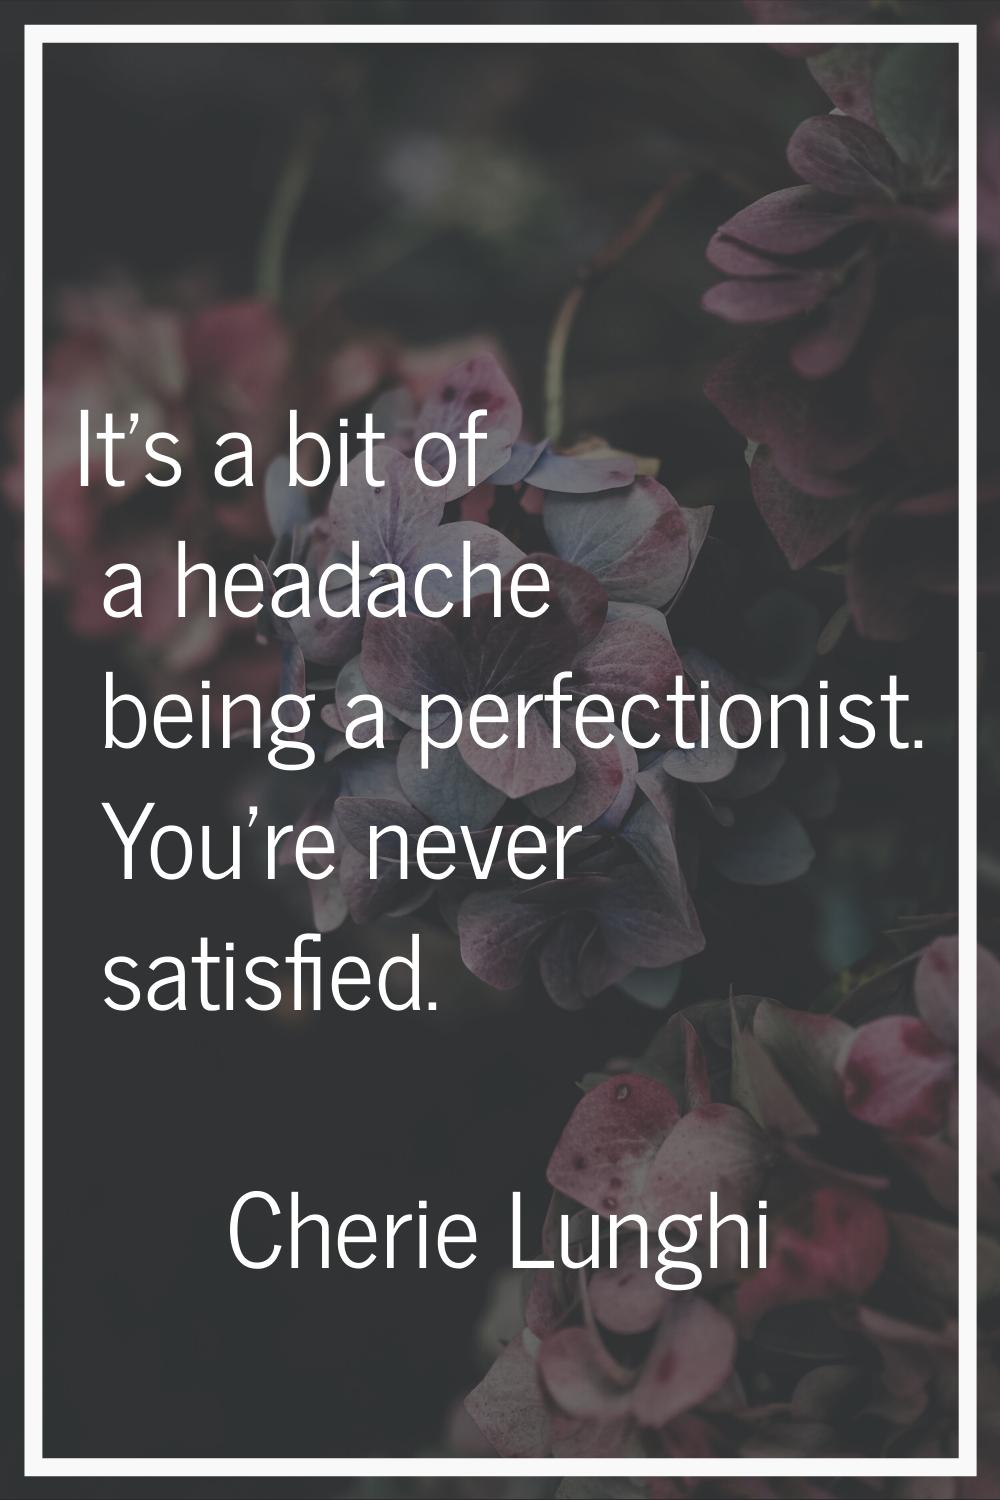 It's a bit of a headache being a perfectionist. You're never satisfied.